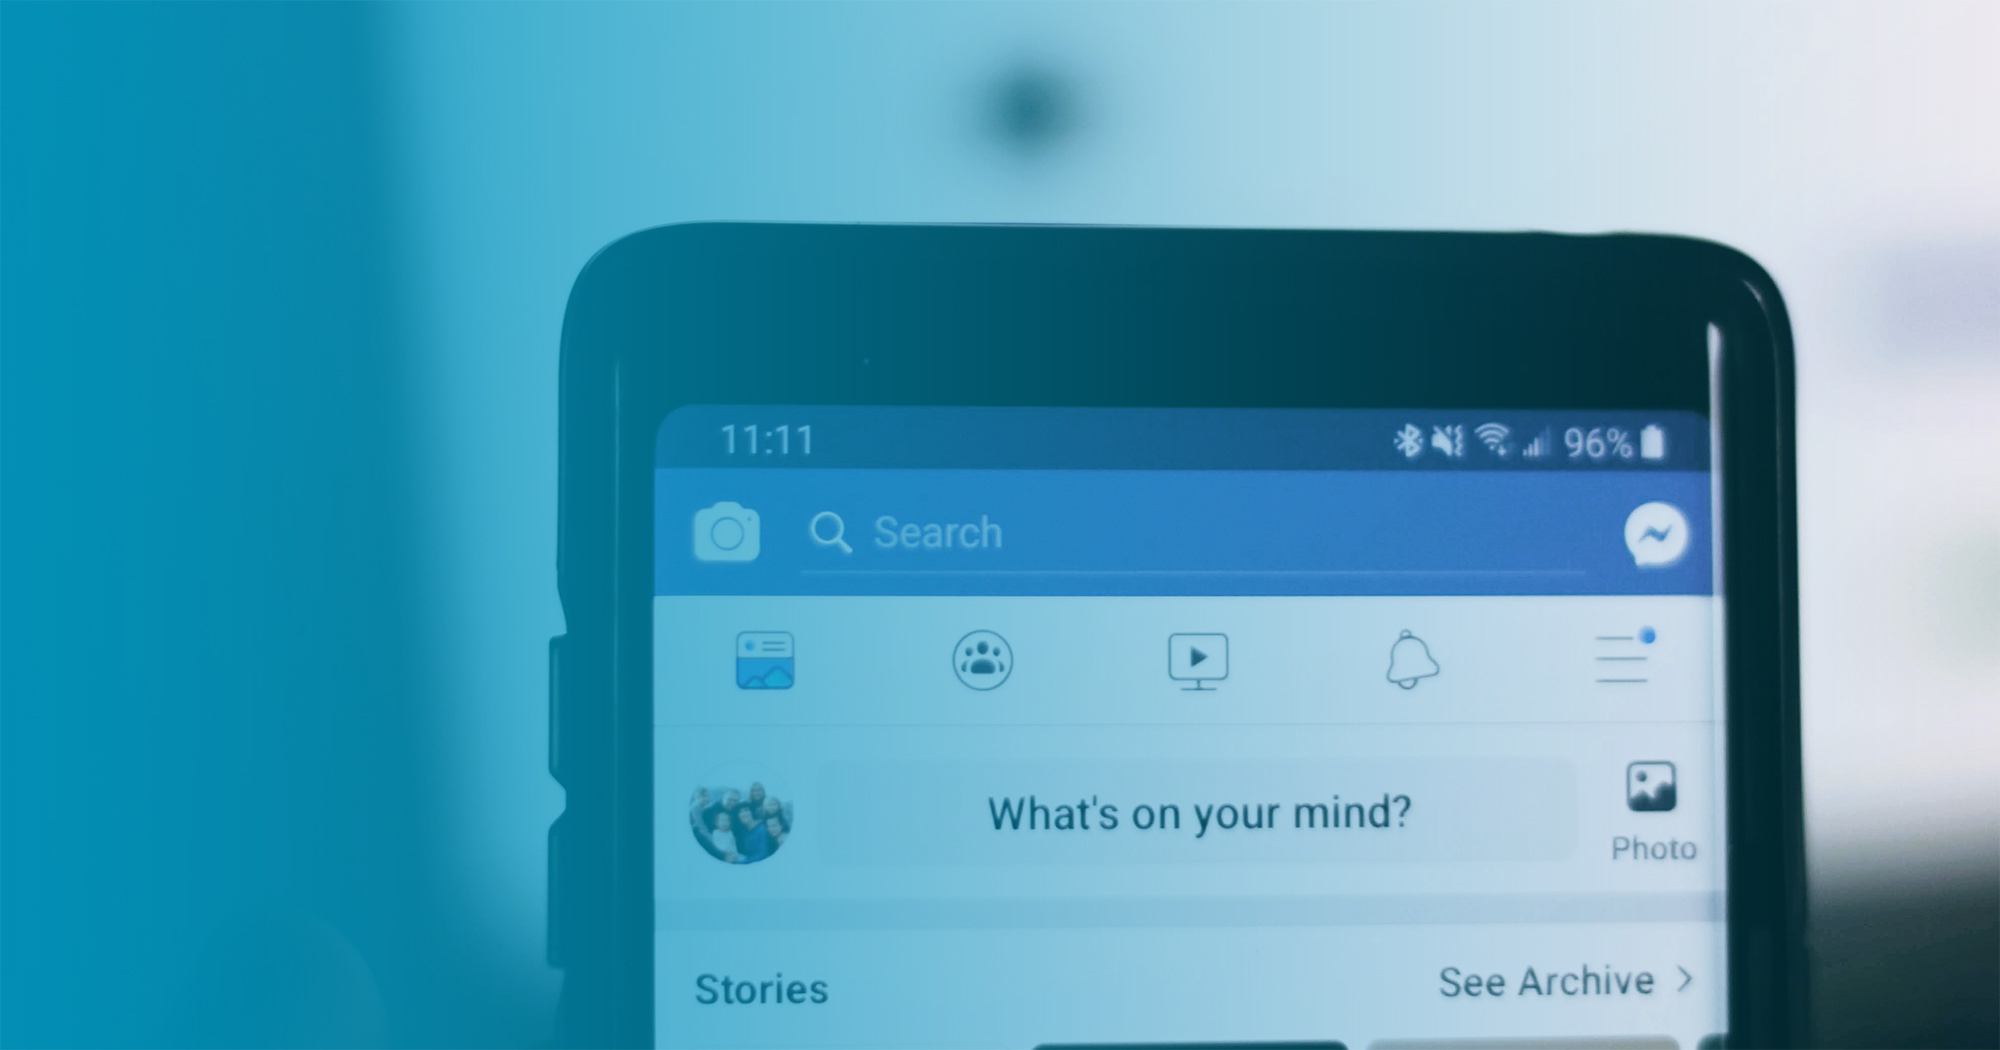 Phone with facebook app opened